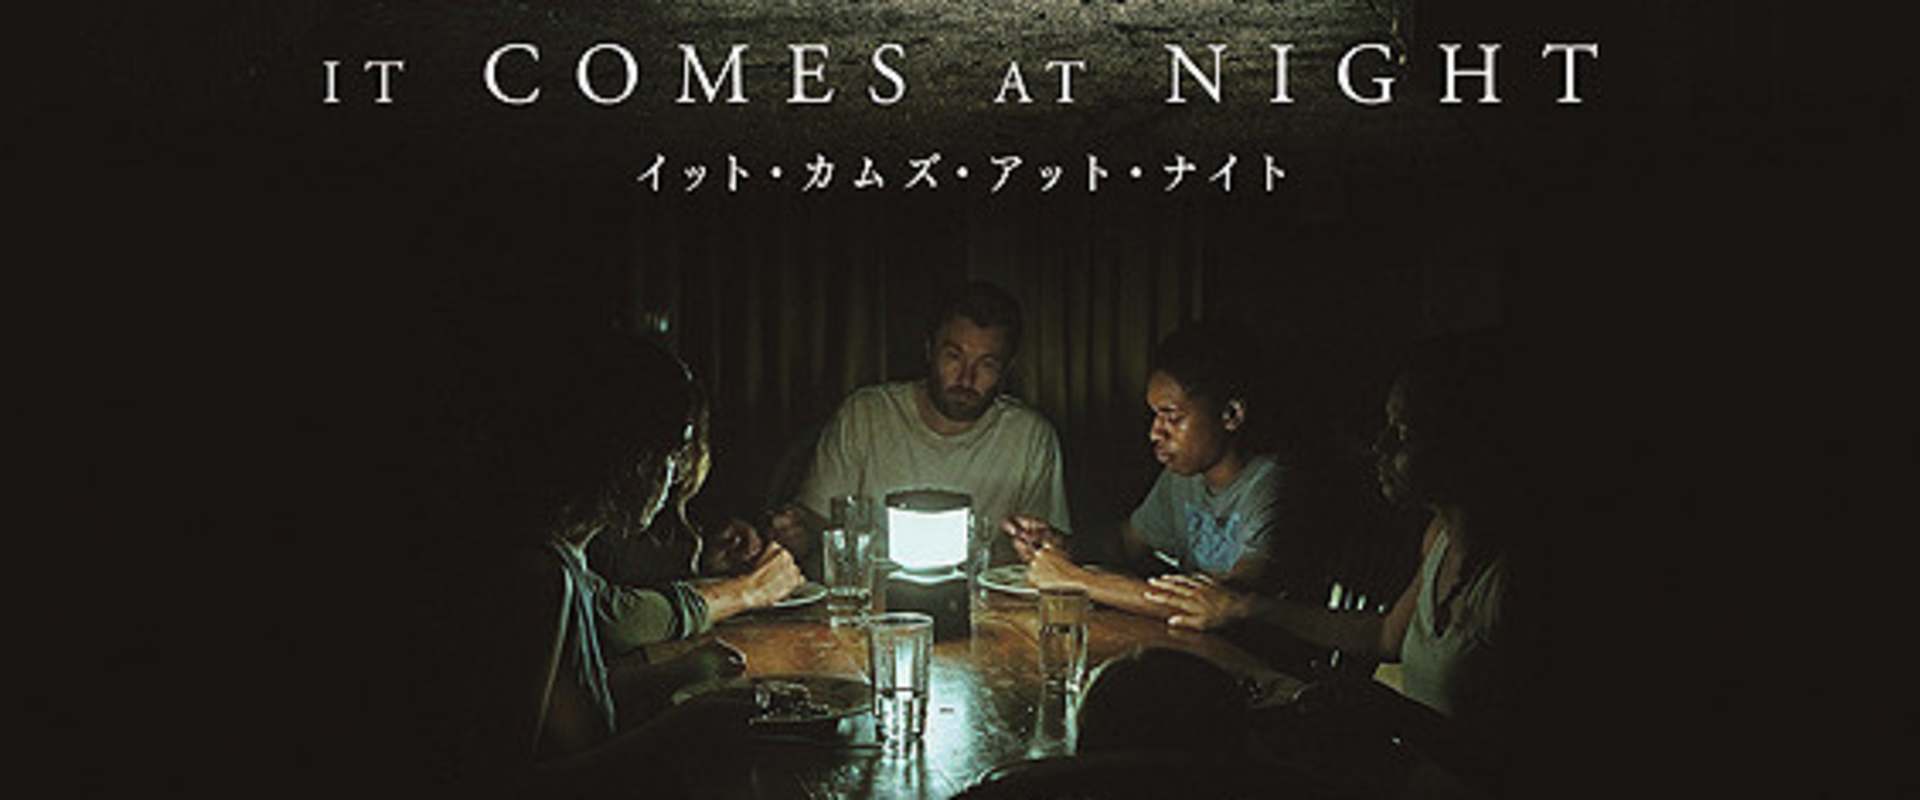 It Comes at Night background 1